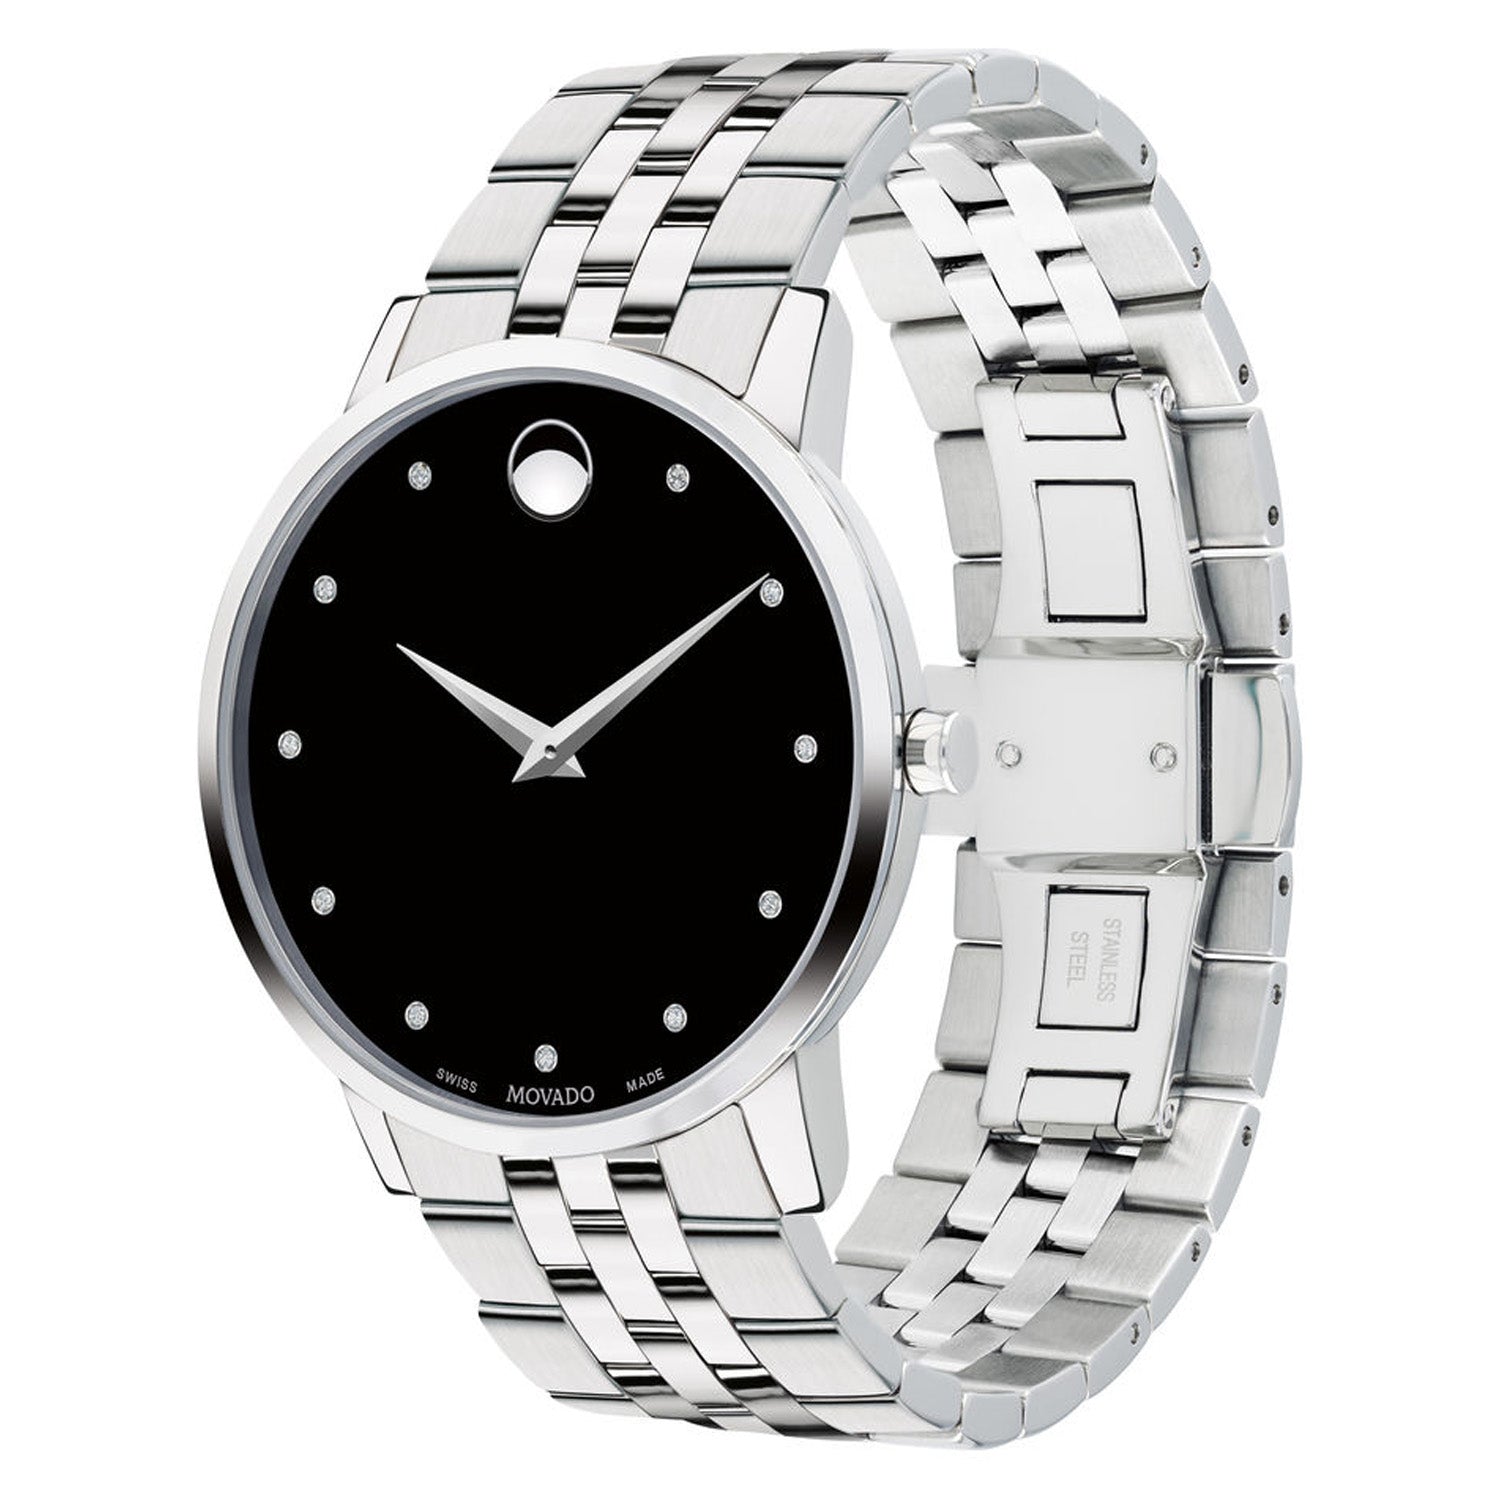 Movado Musuem Classic Mens Diamond Watch with Black Dial and Stainless Steel Bracelet (Swiss quartz movement)